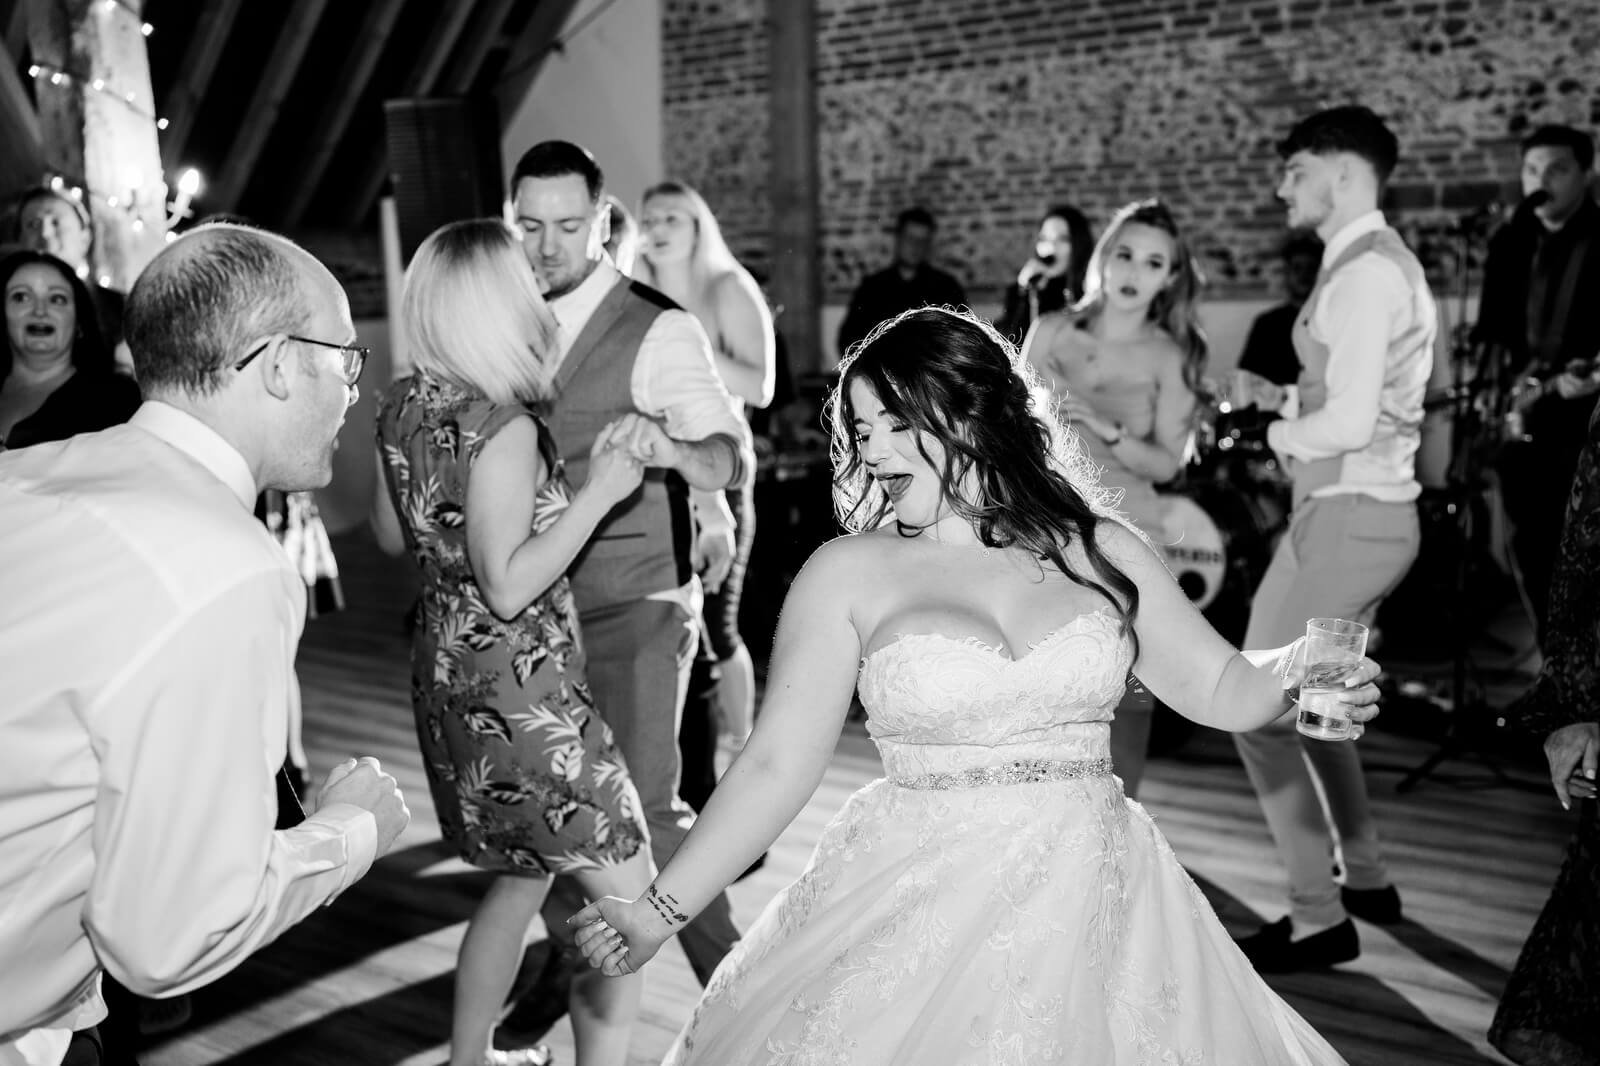 bride dancing at barford park wedding venue with band the deloreons